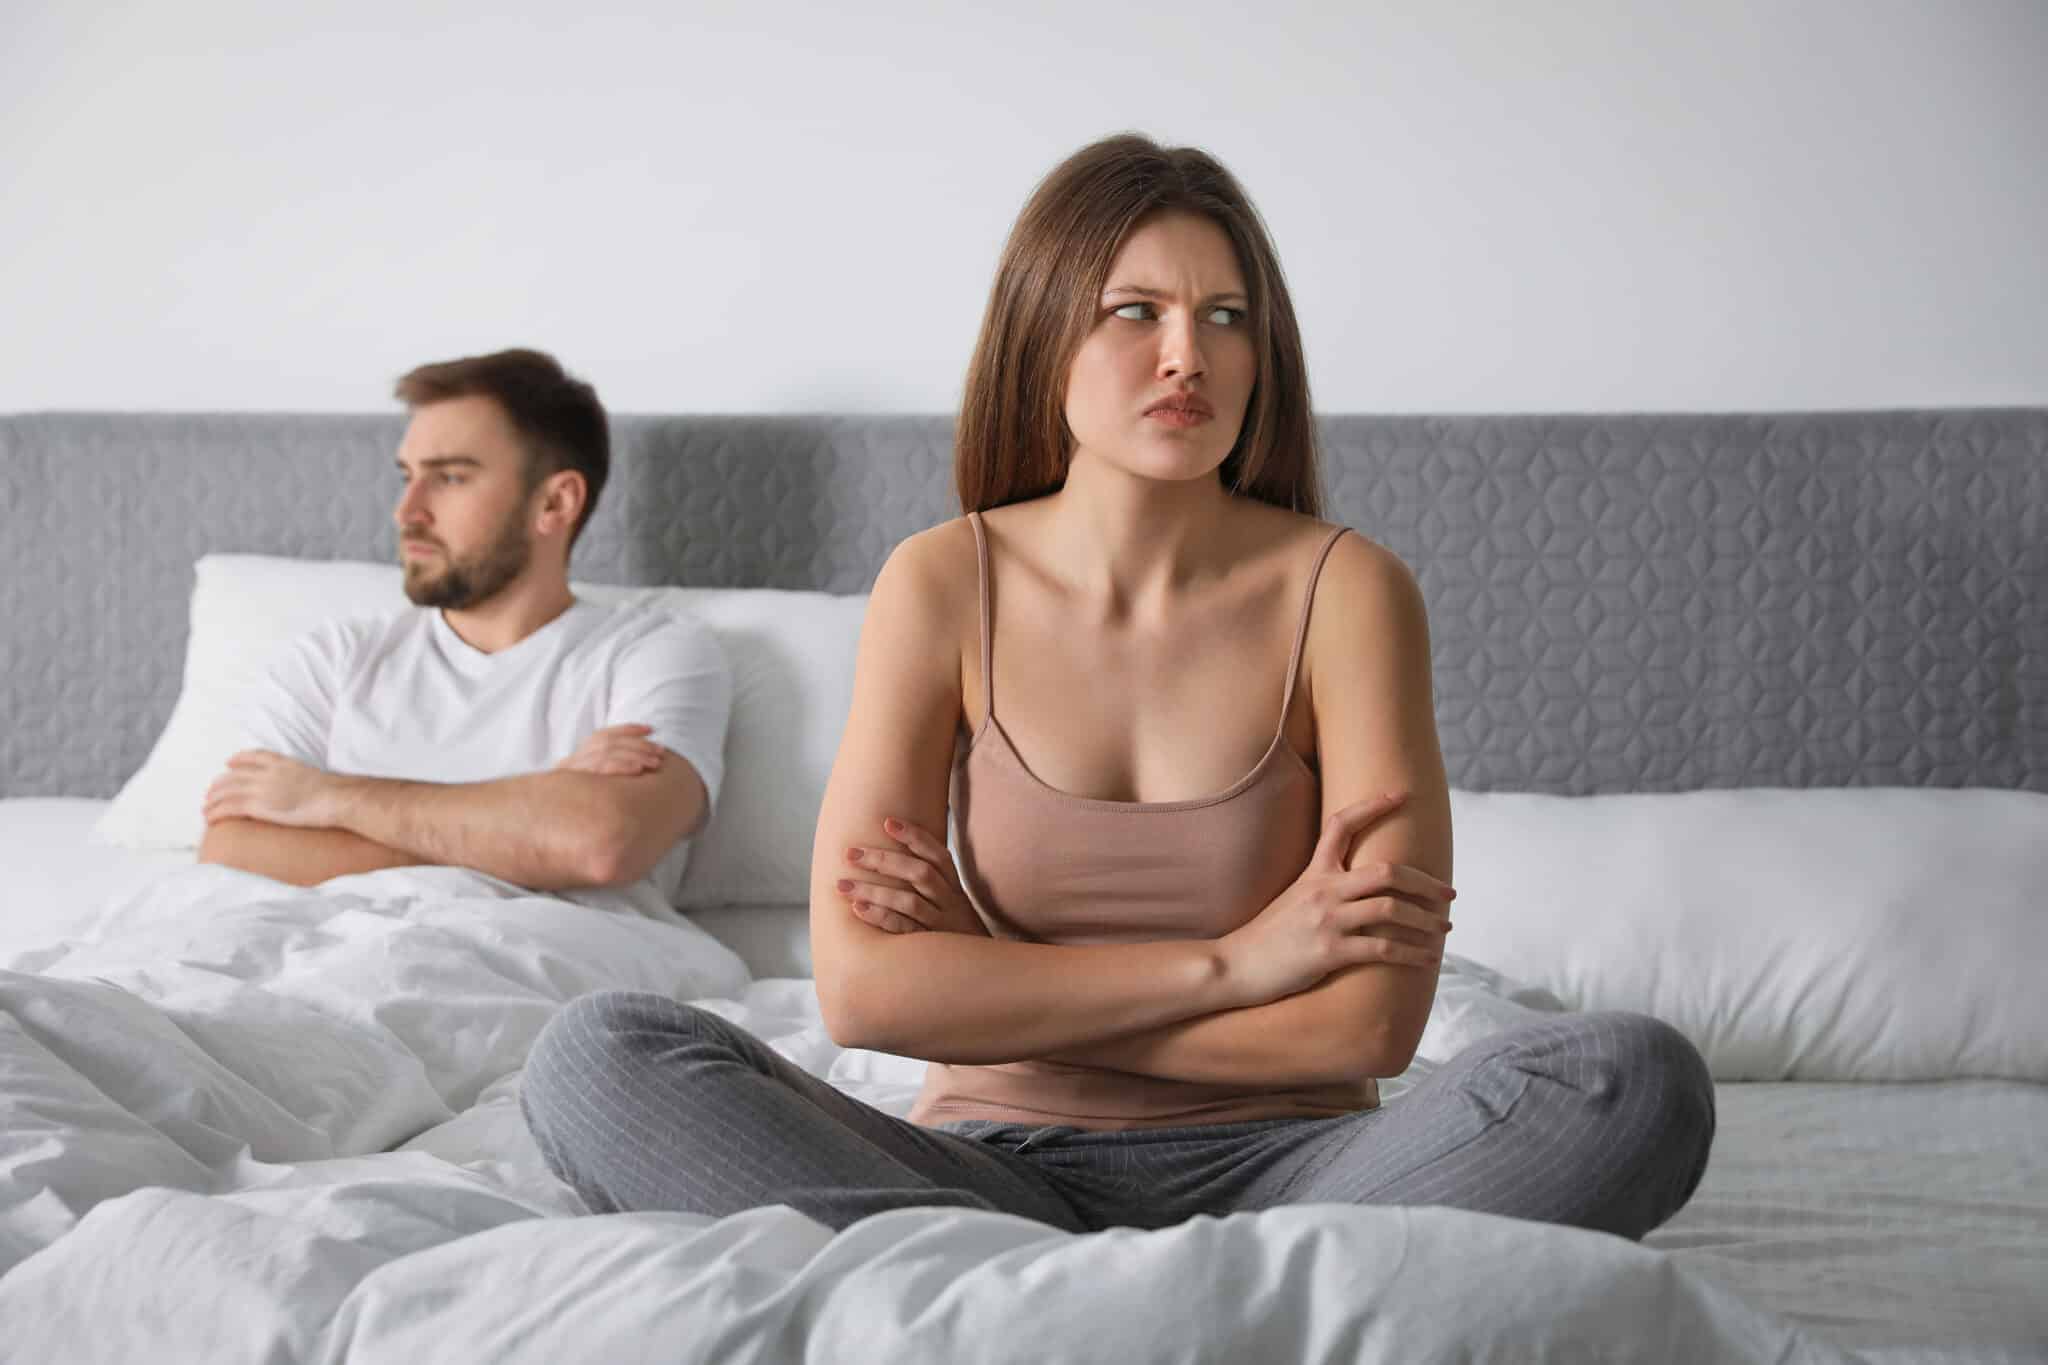 How to Navigate and Improve a Sexless Marriage